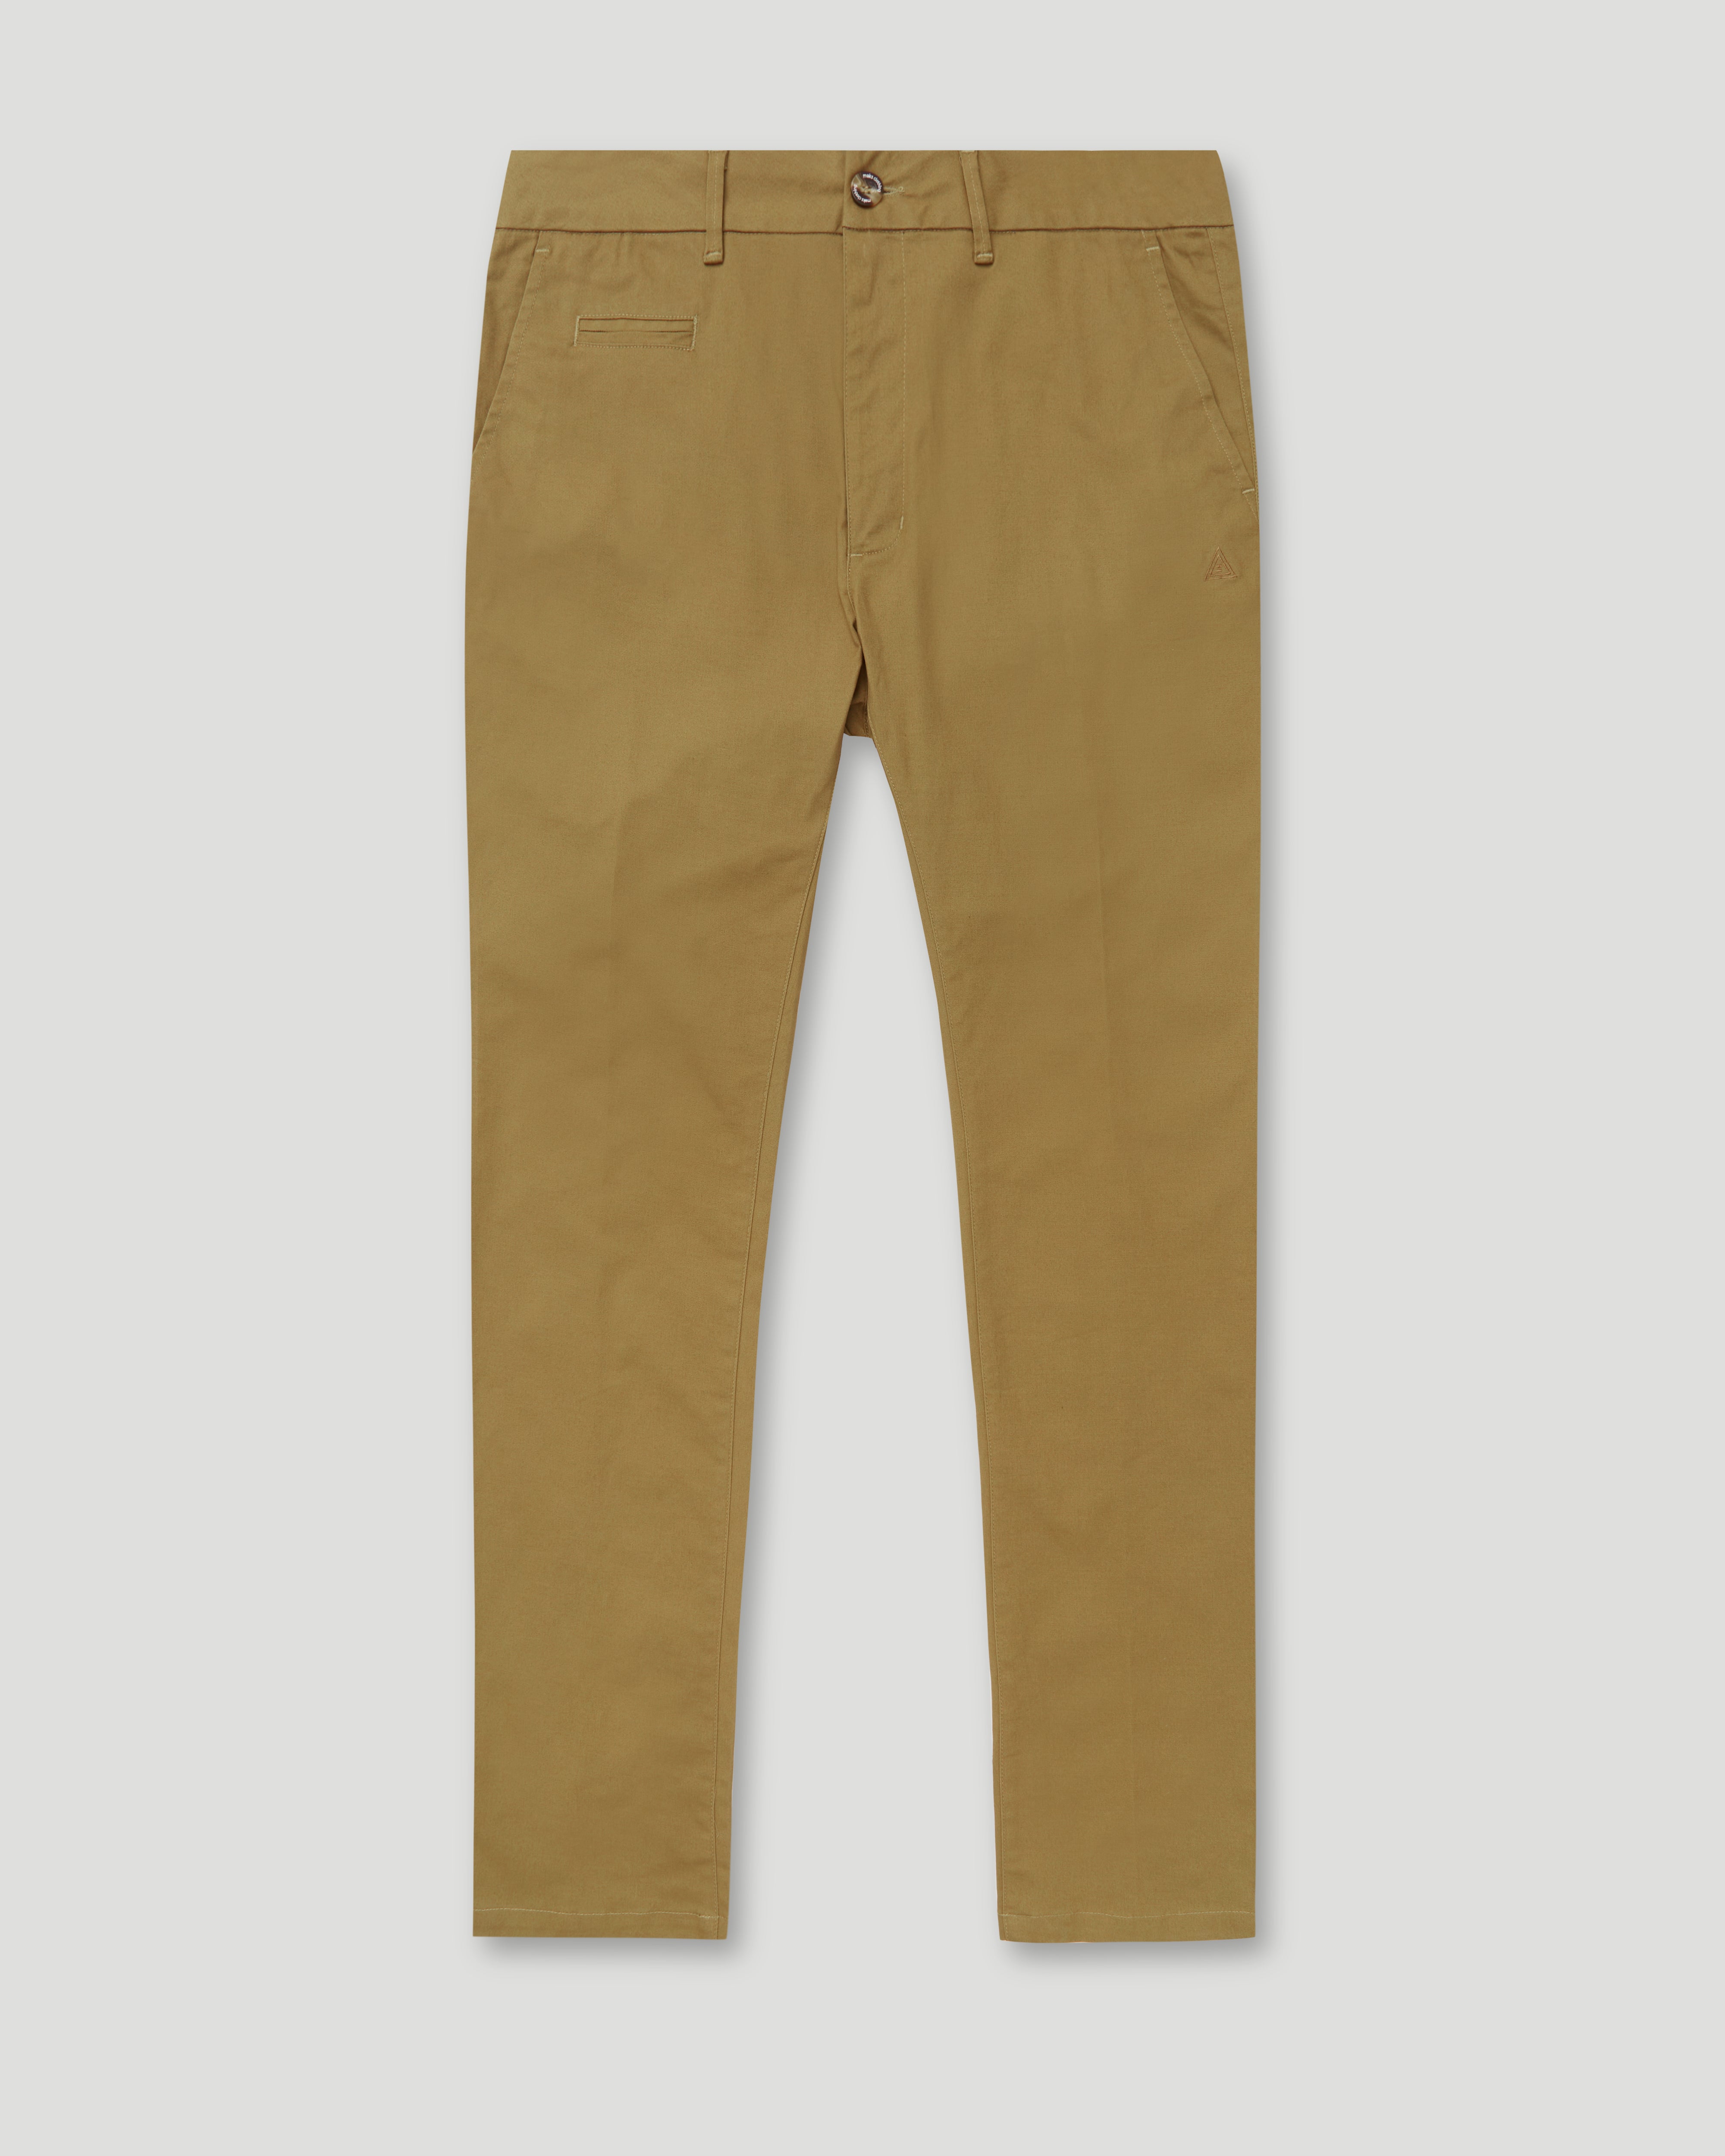 Tan Signature Chinos - No sale items Meks credits on – exchanges or